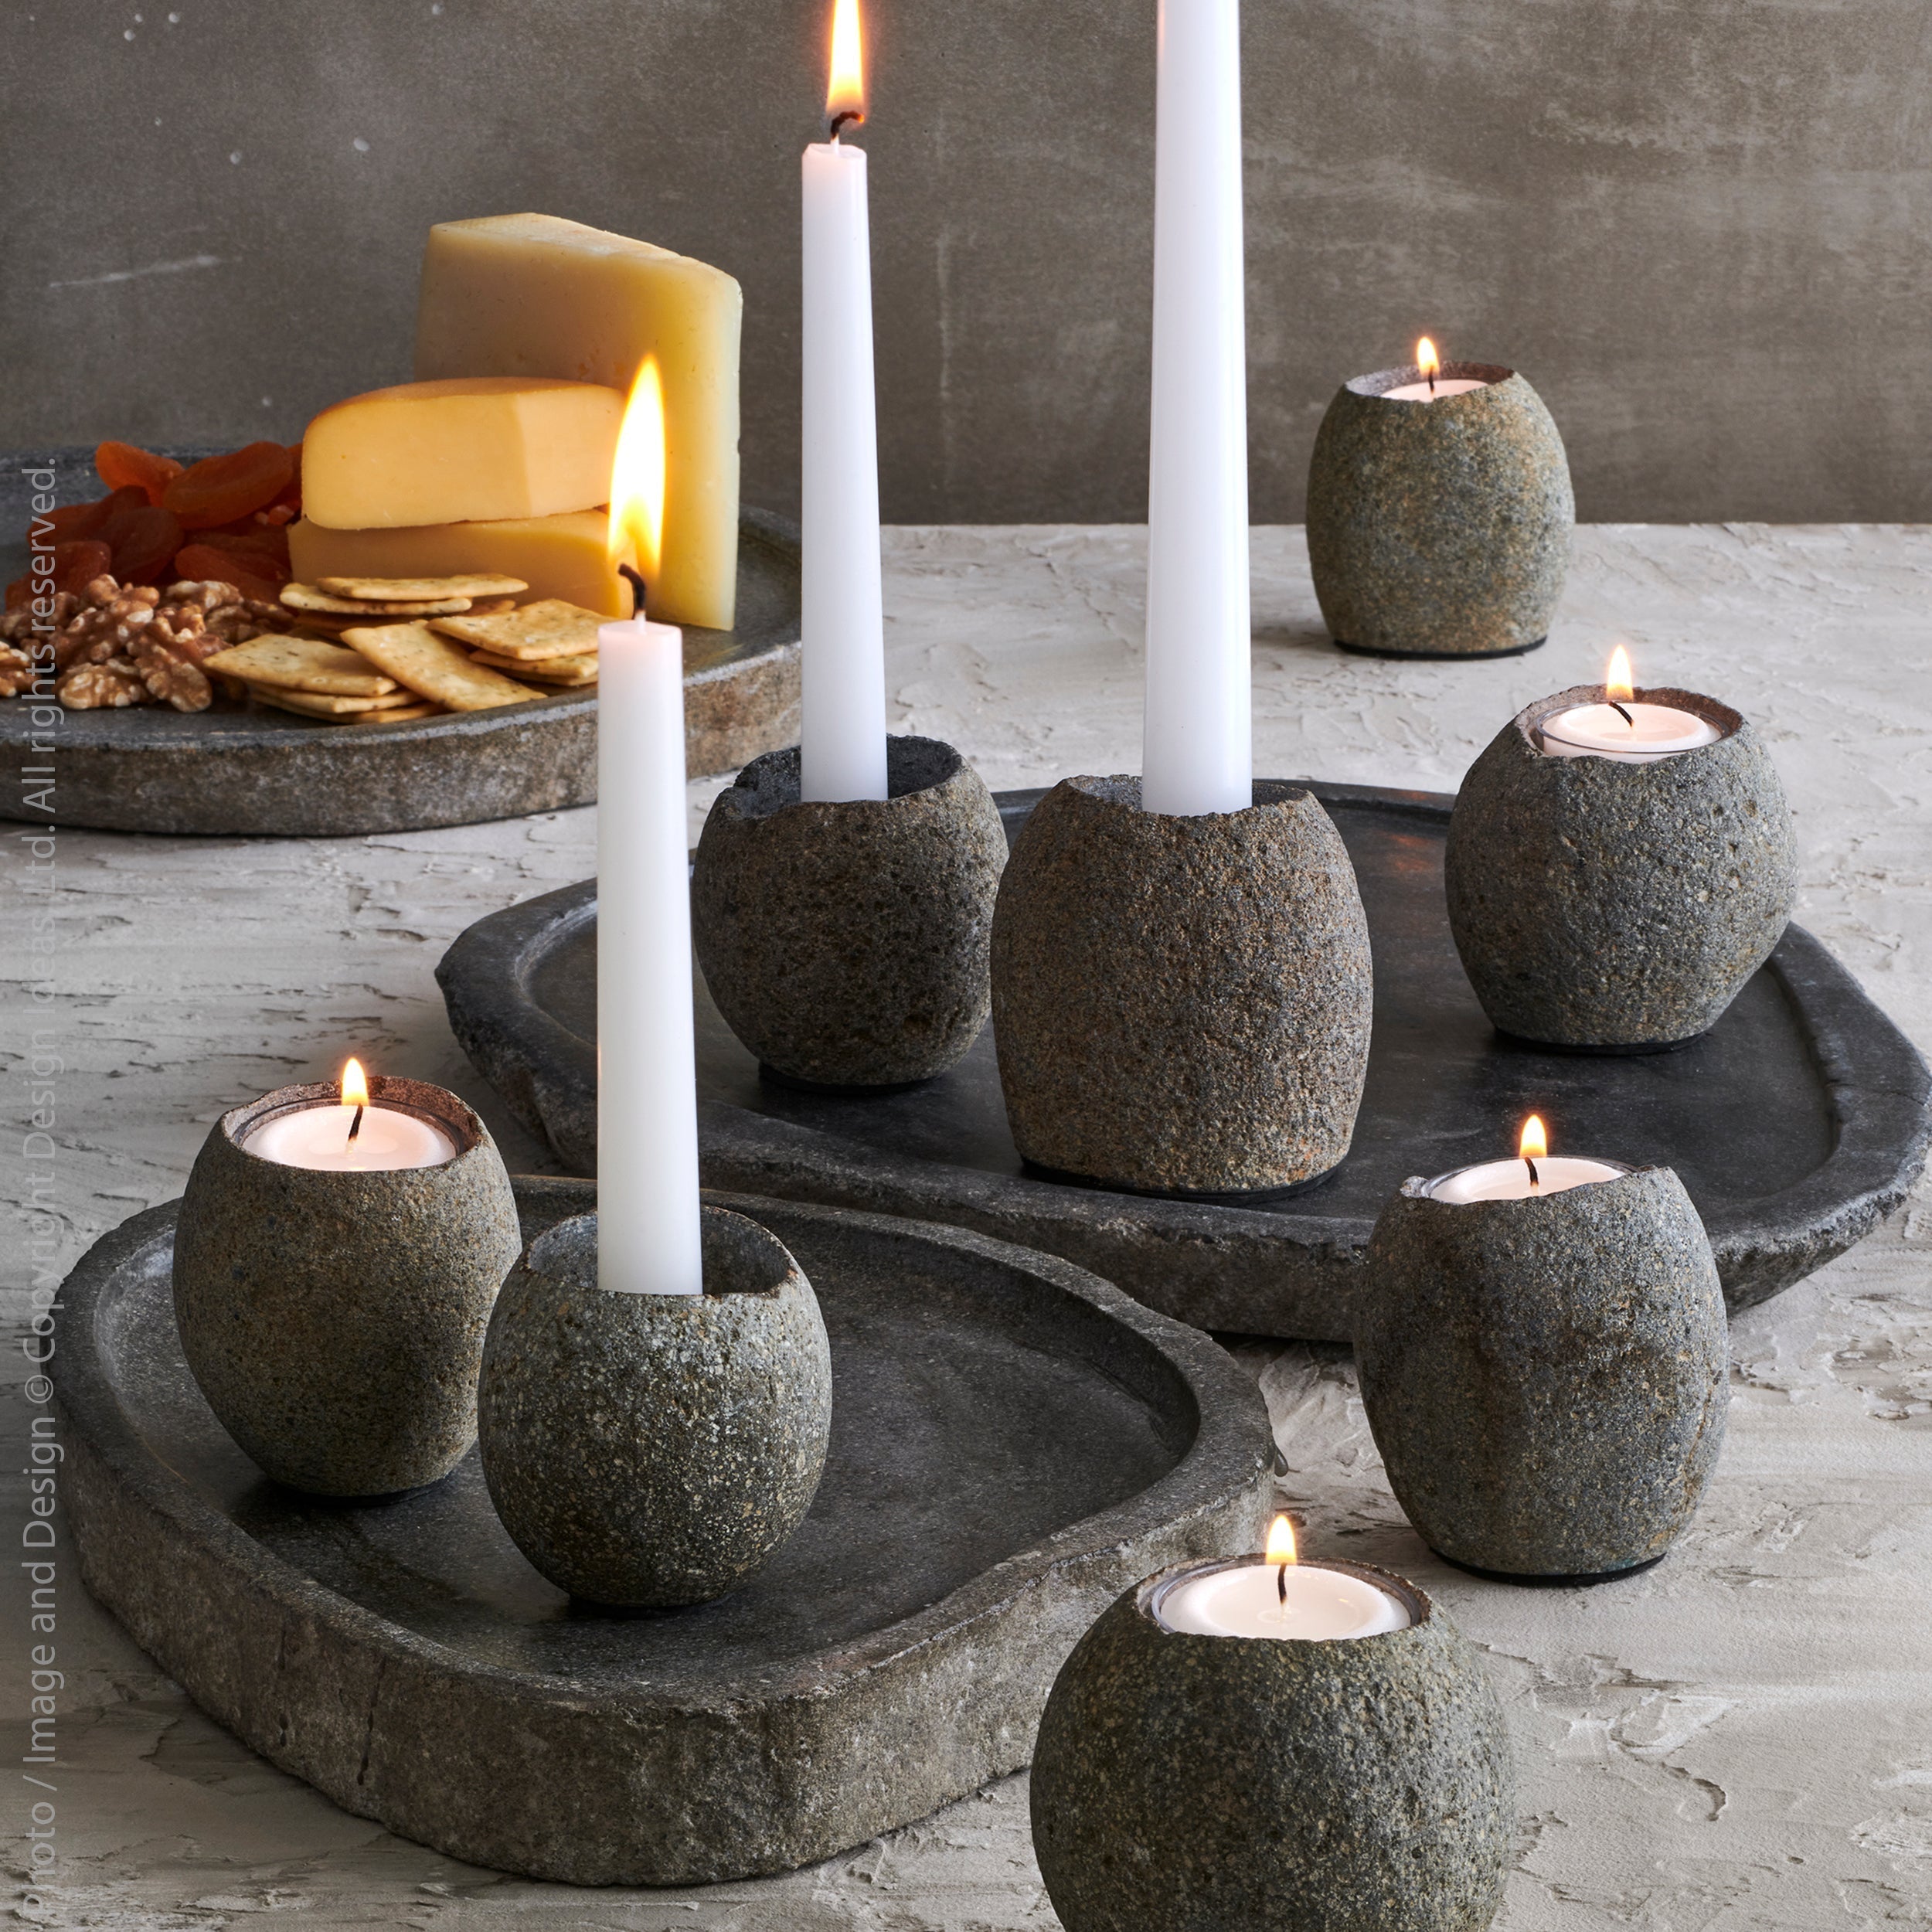 Stoneshard™ Carved Riverstone Candleholder - Black | Image 2 | Premium Candleholder from the Stoneshard collection | made with Riverstone for long lasting use | texxture